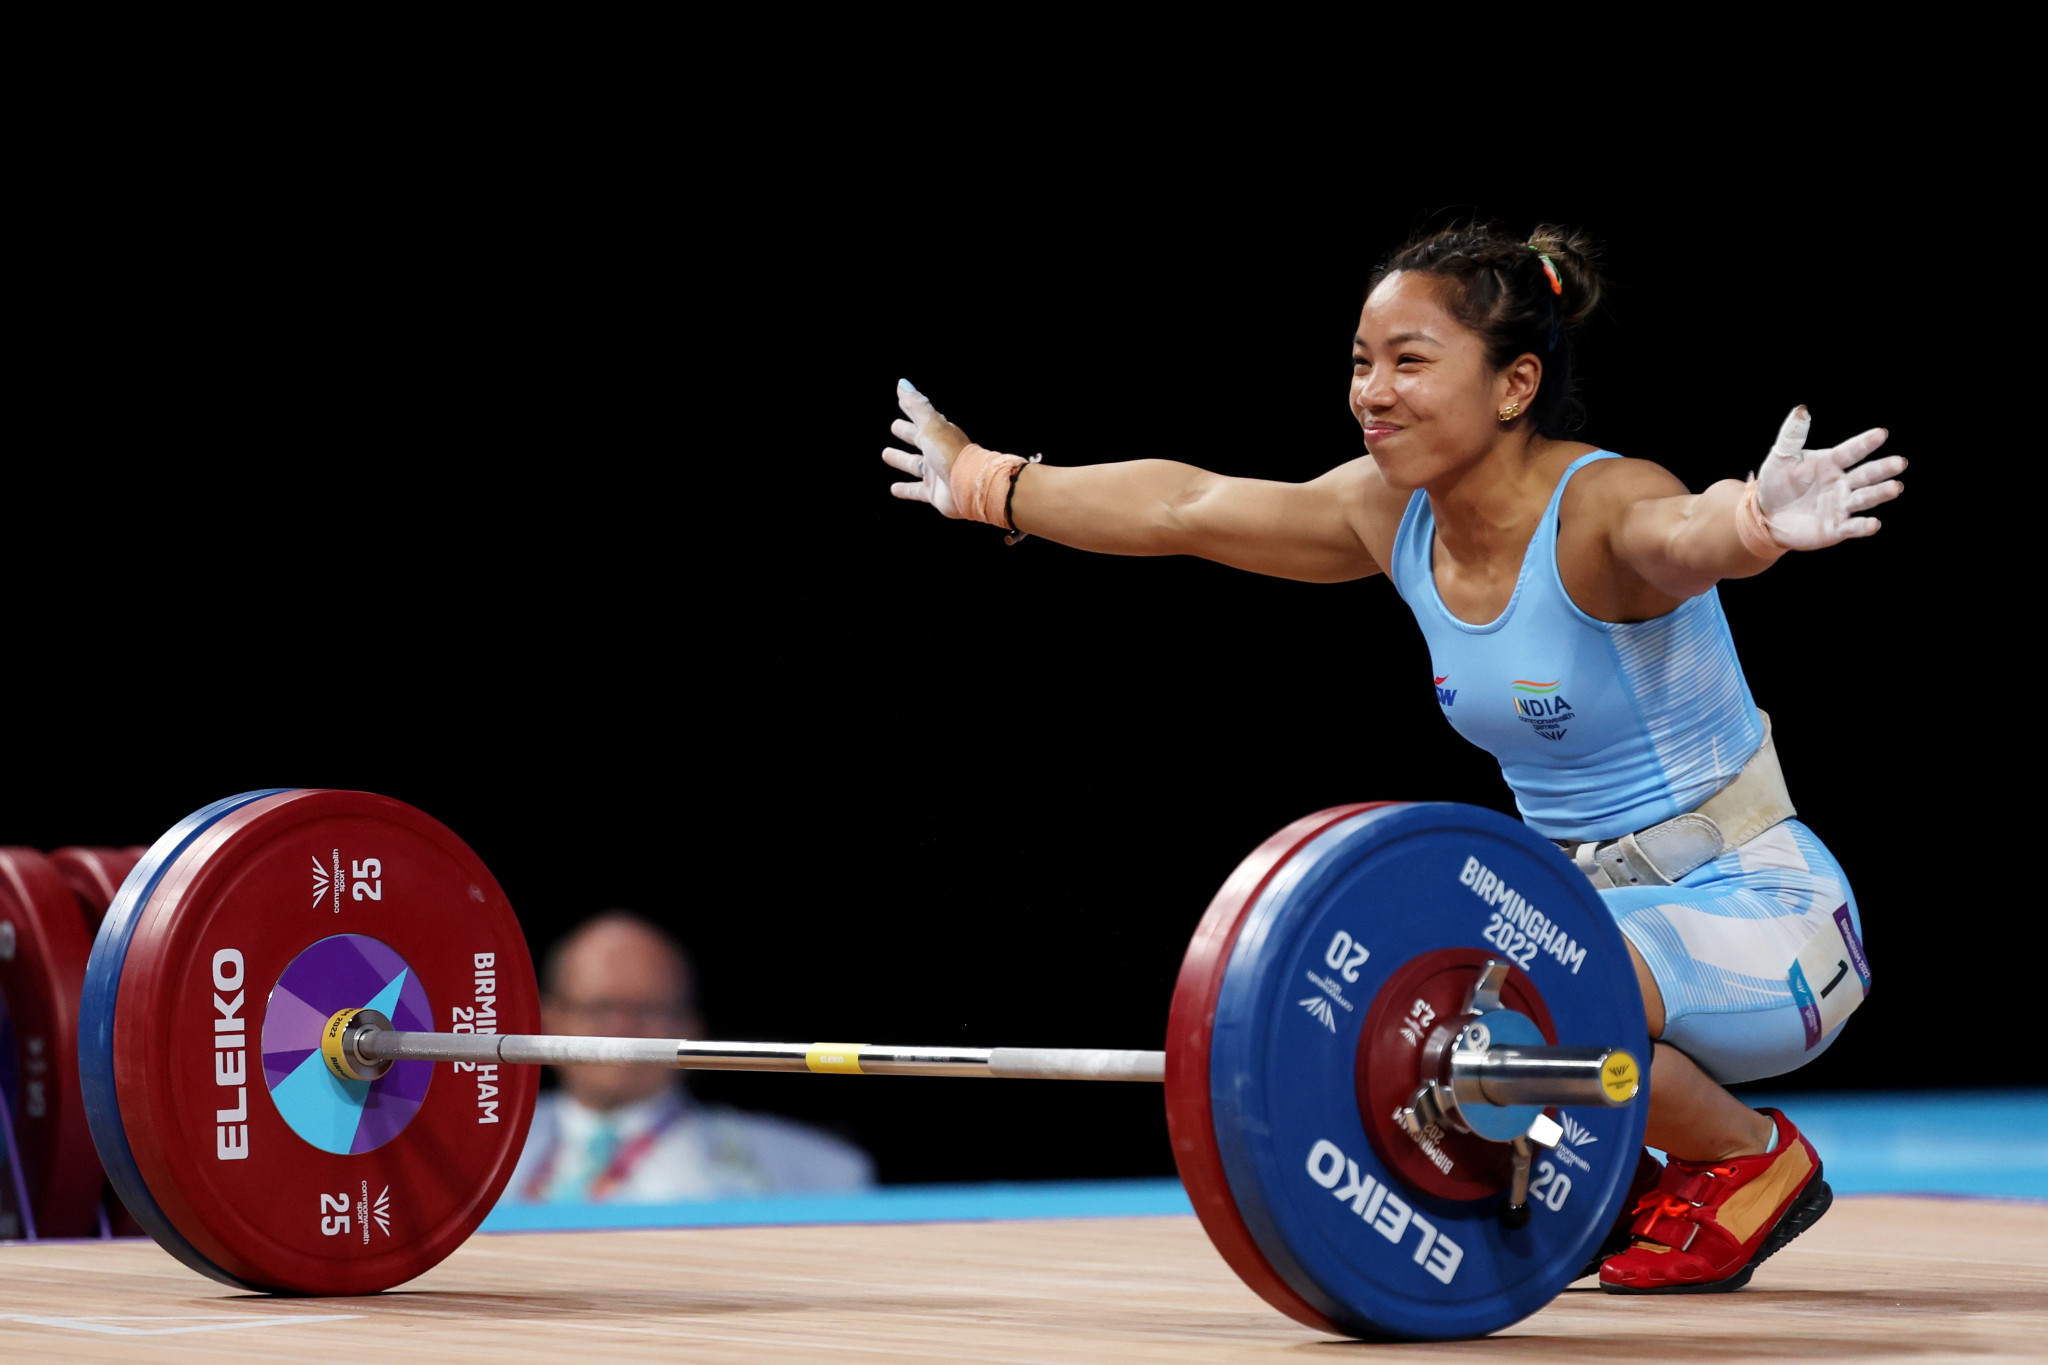 Mirabai Chanu was among the Indian weightlifters who trained in Russia this month ©Getty Images